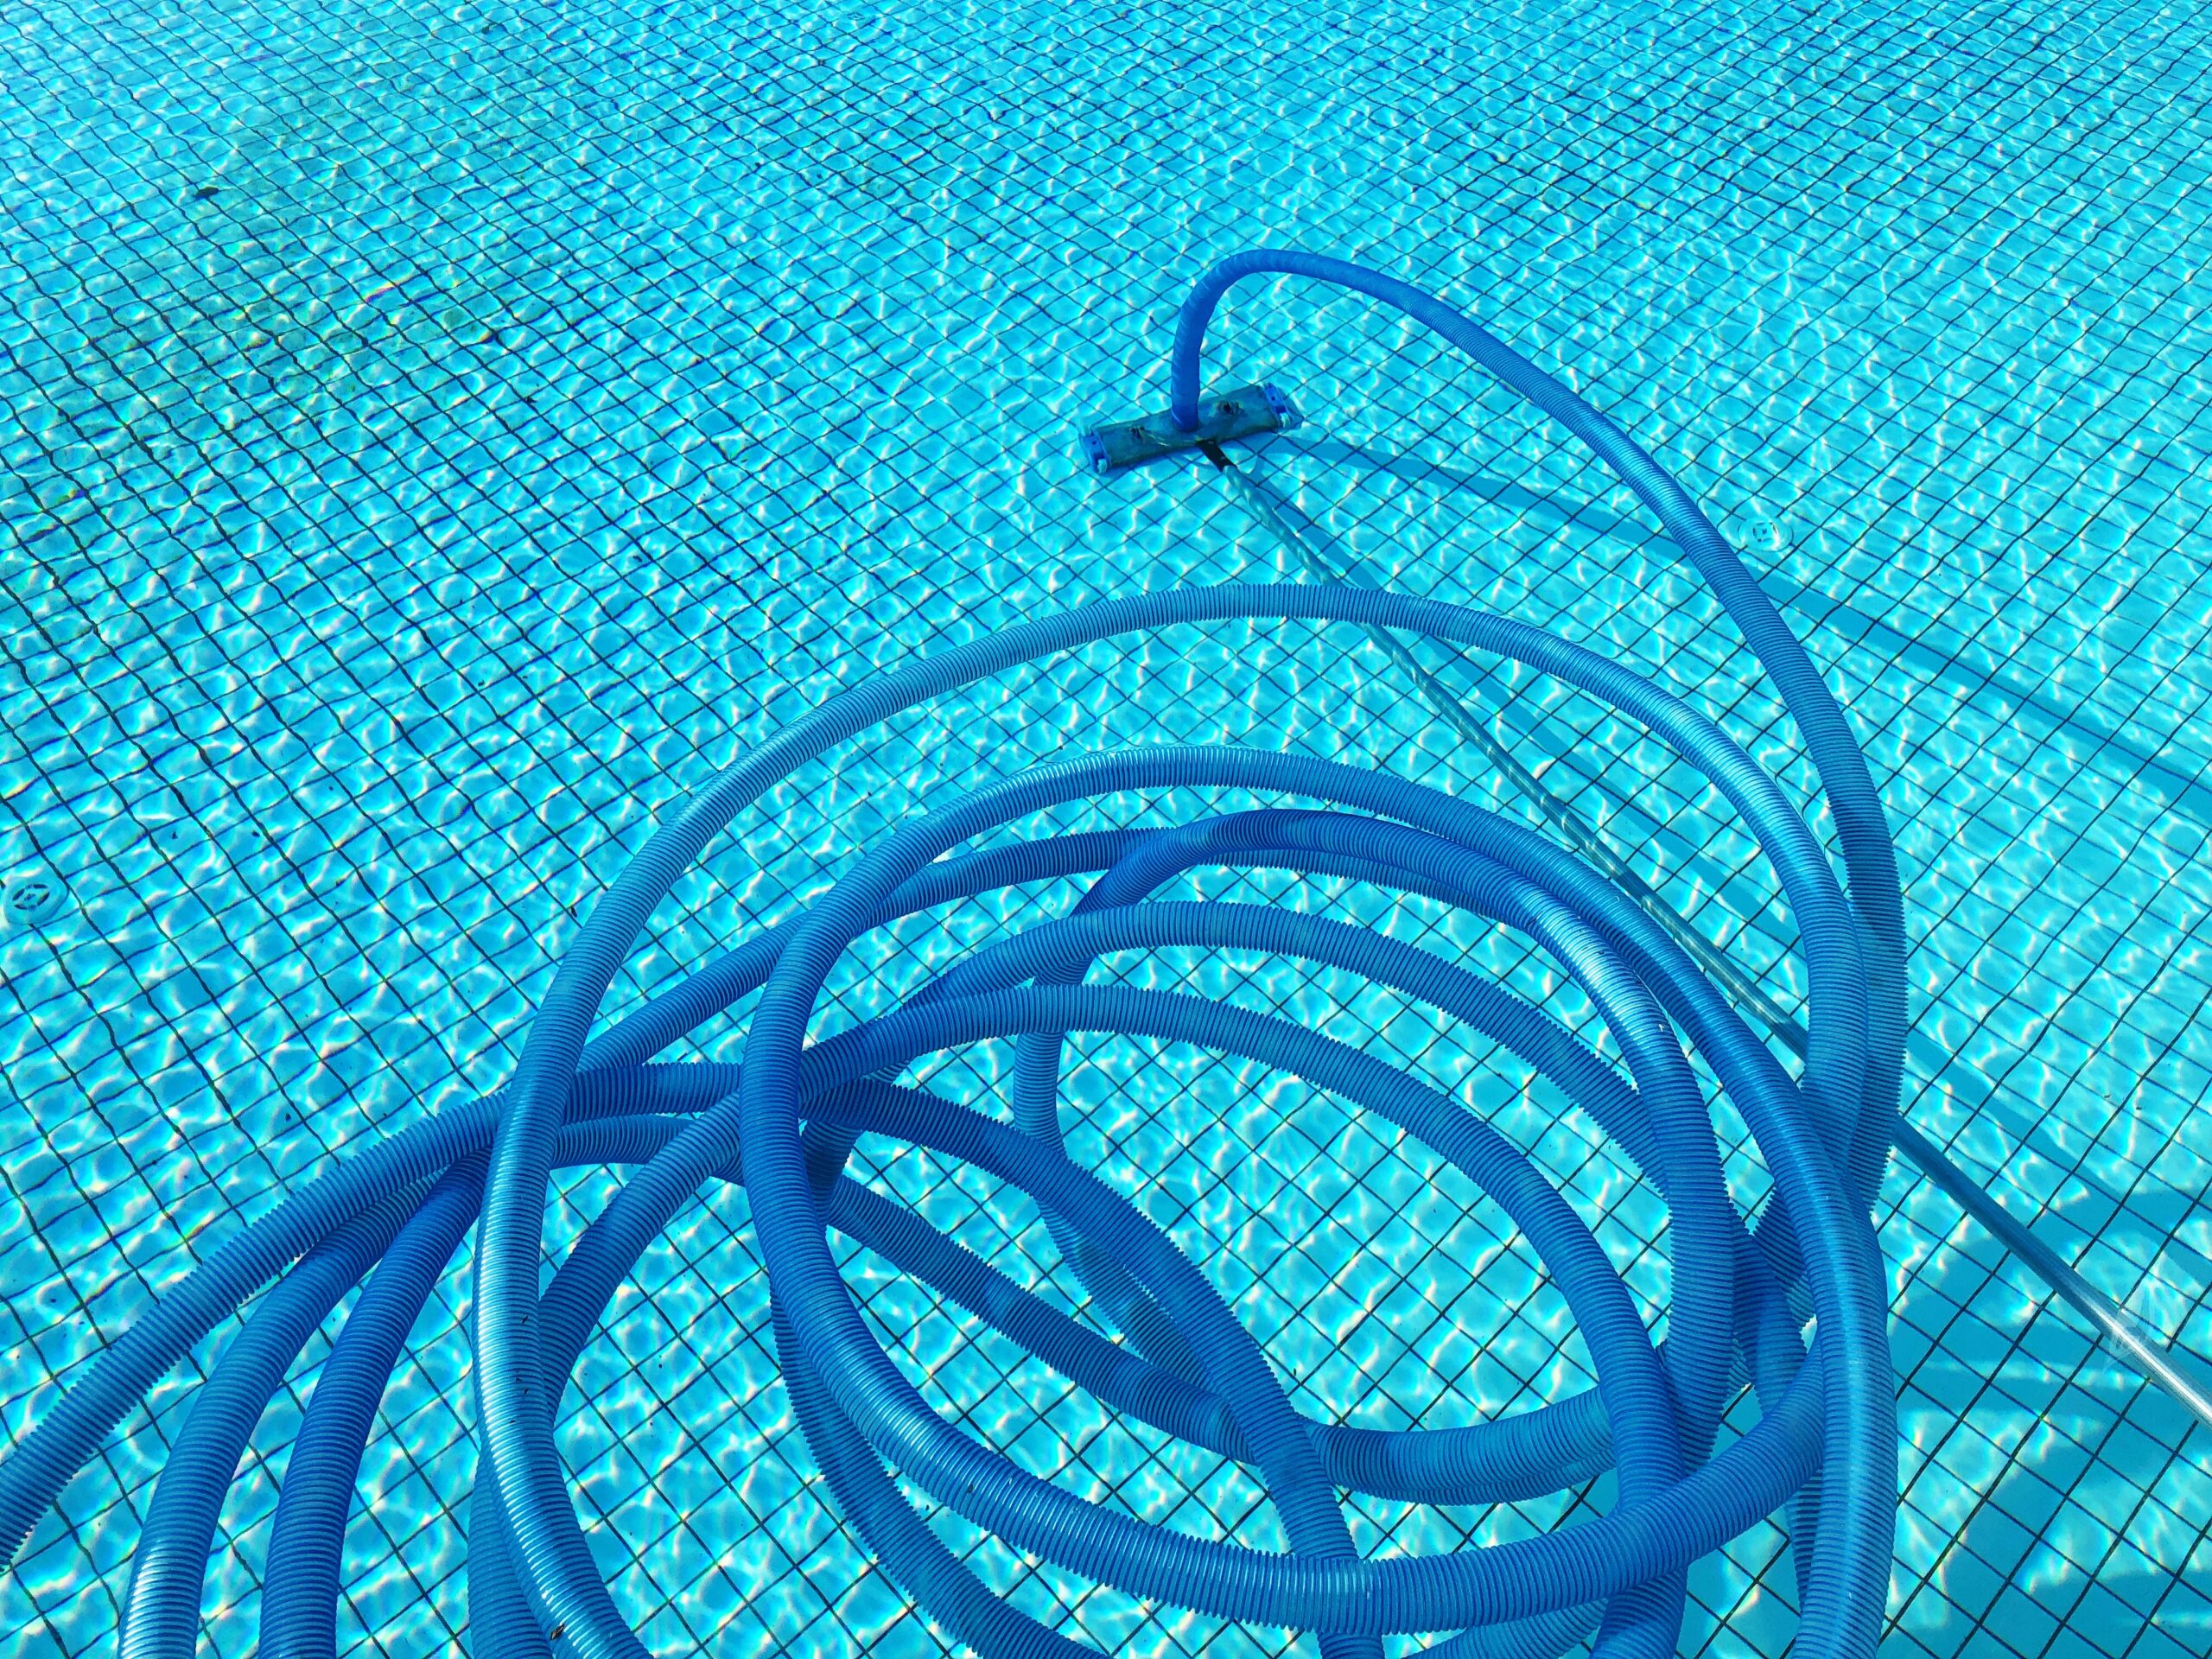 How To Winterize Your Pool and Accessories